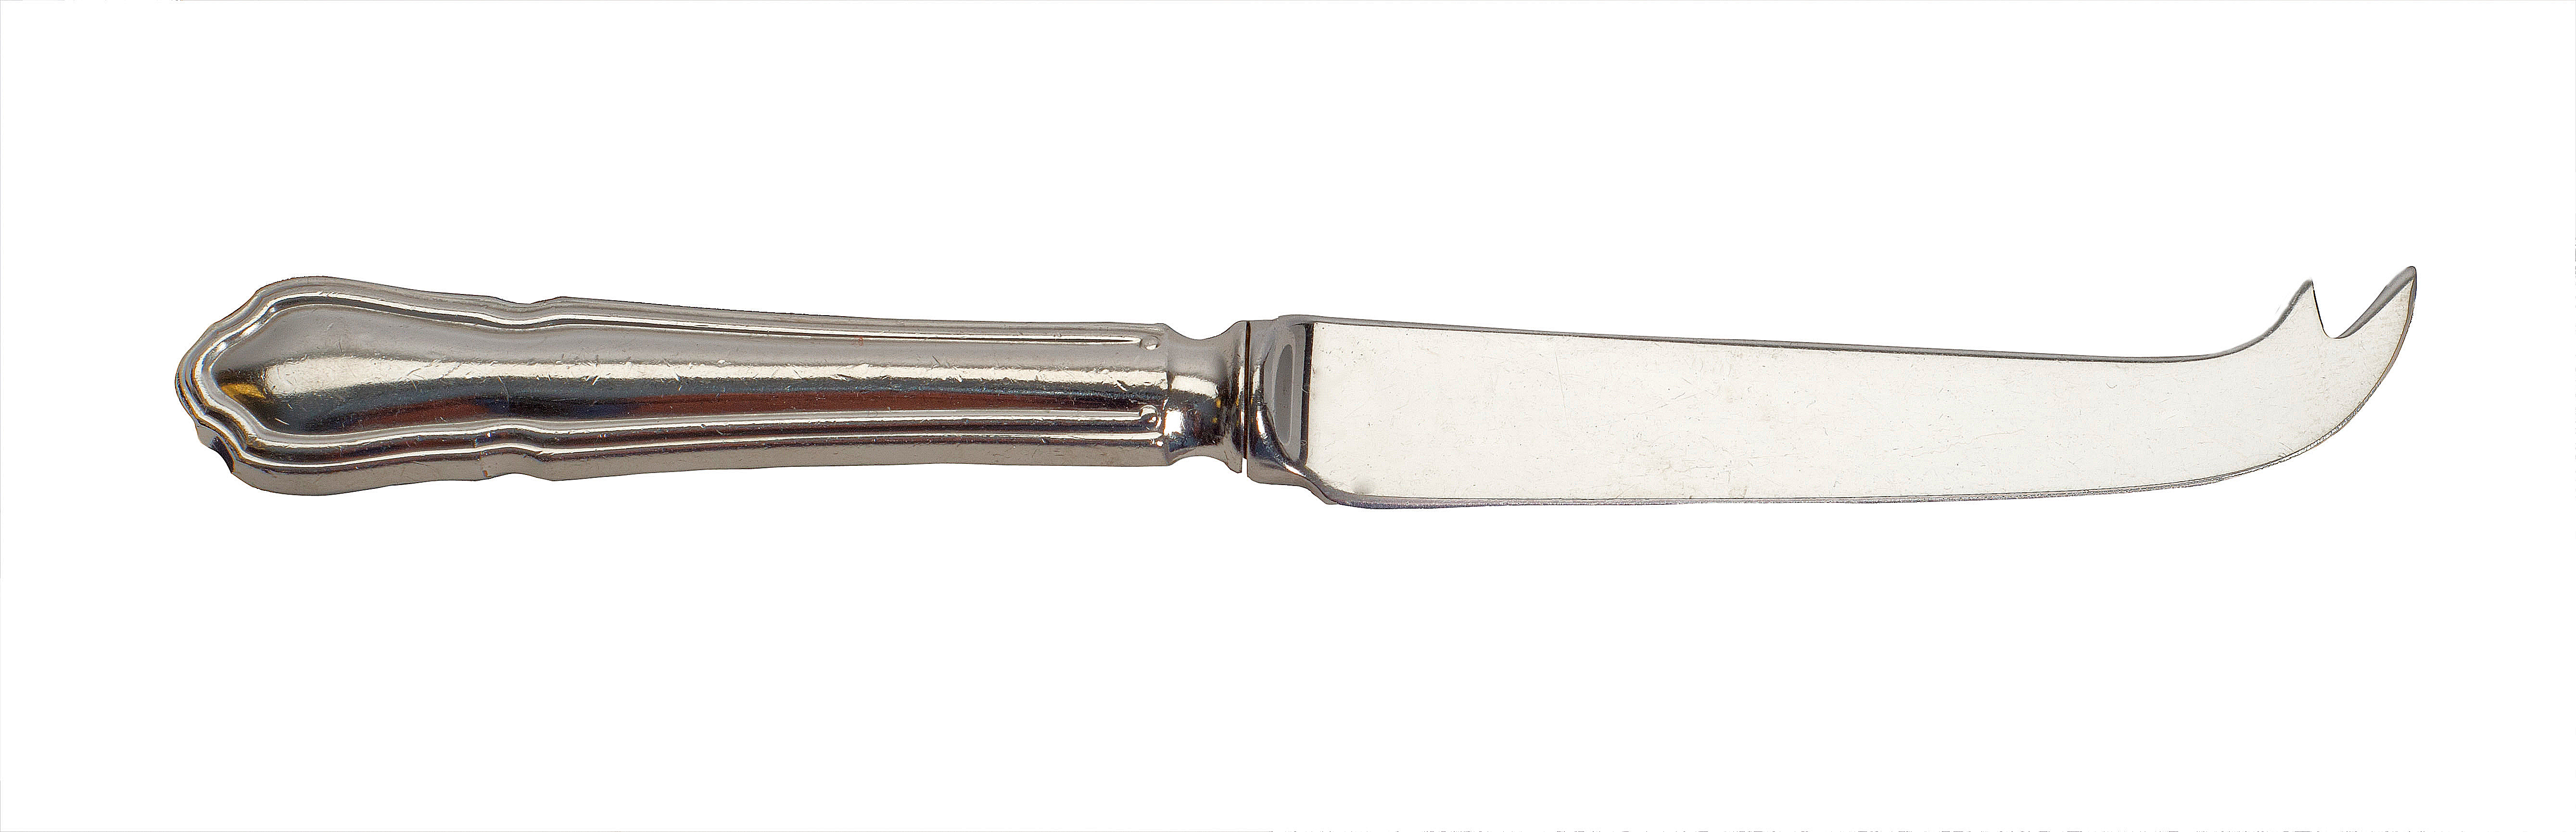 category_B1014 - Cheese Knife